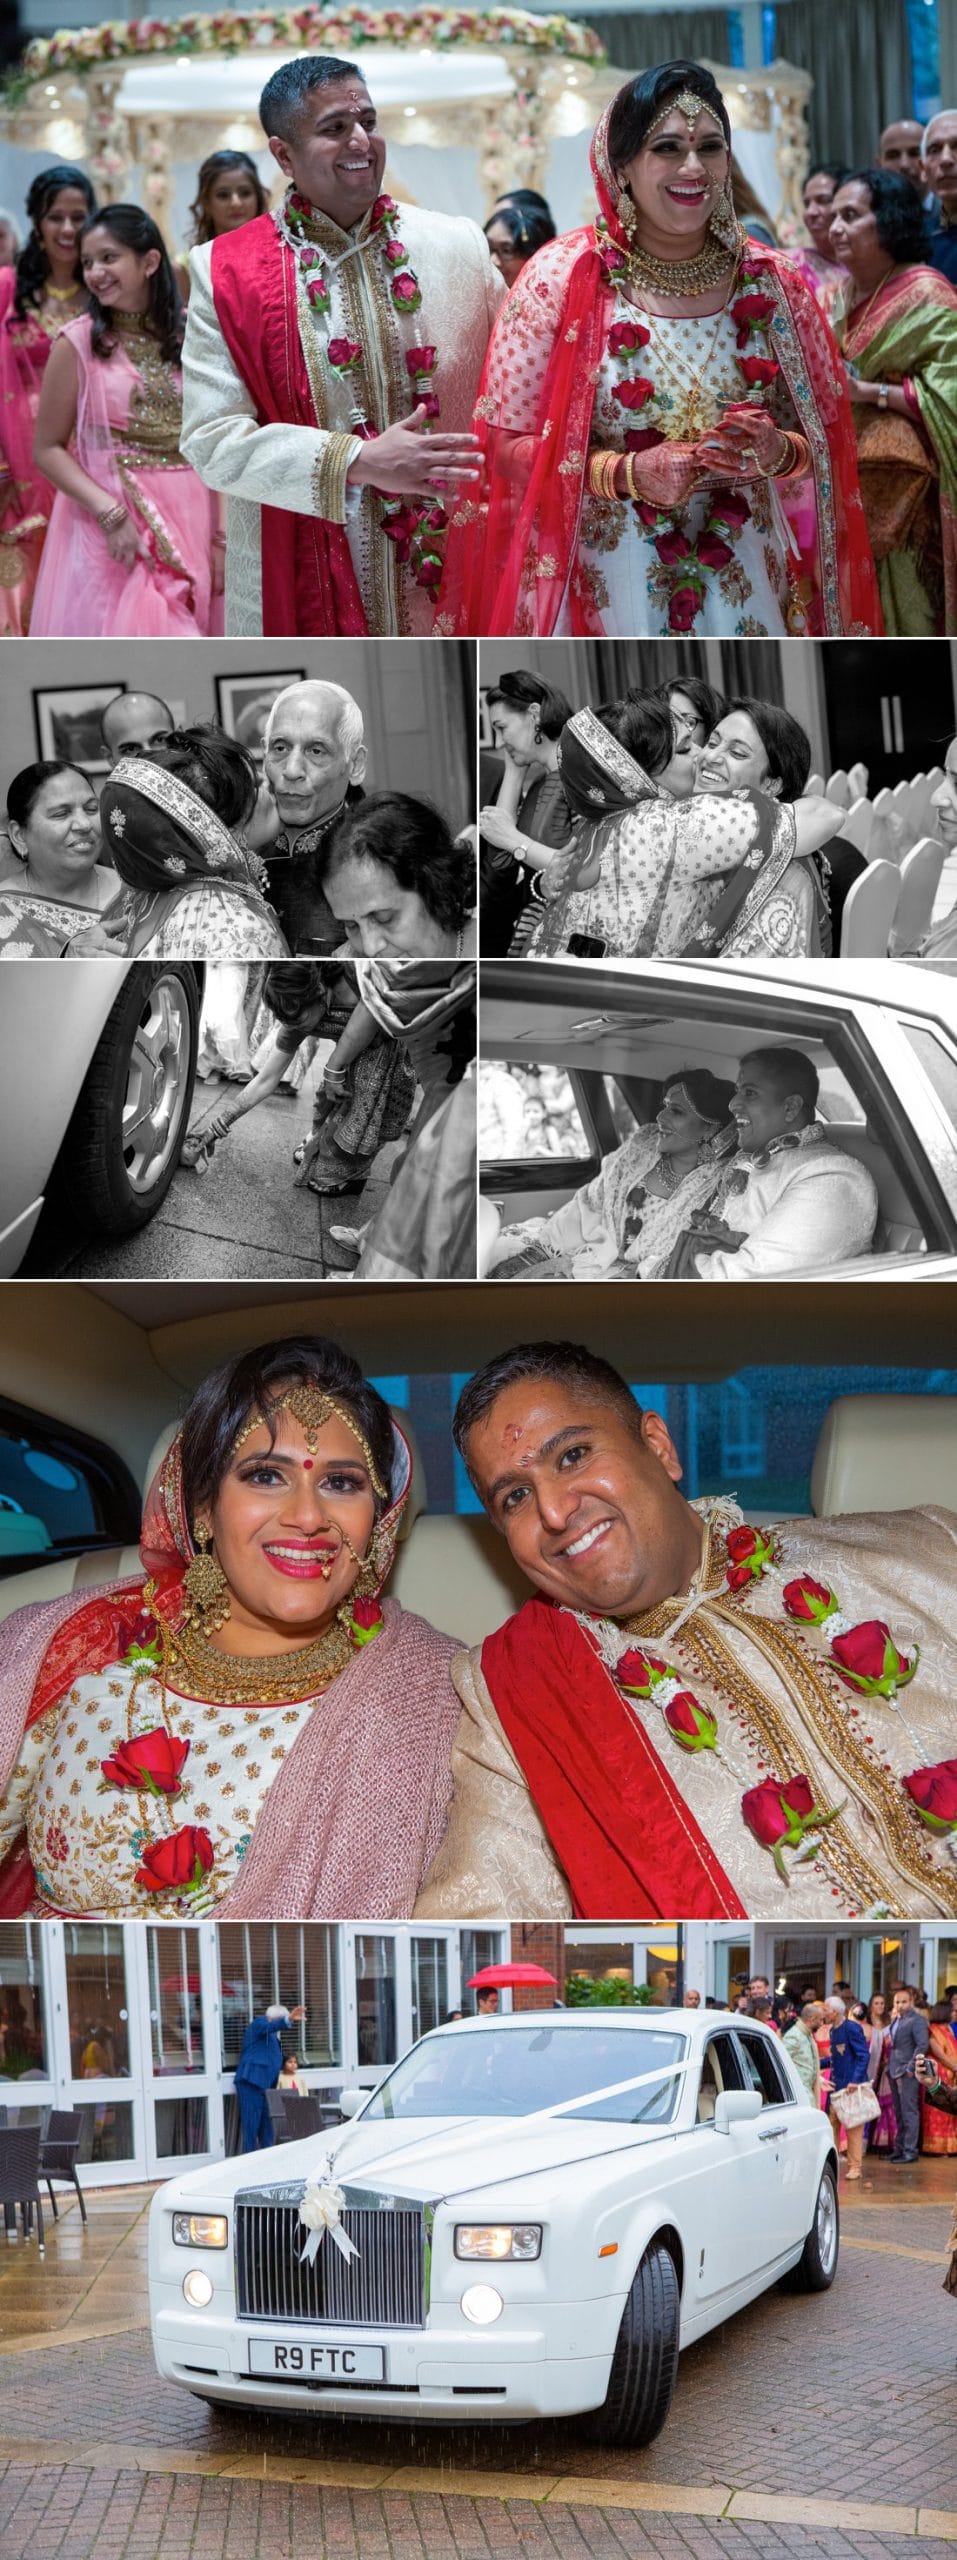 Hindu wedding Photography and Video at the Belfry Hotel 14 scaled